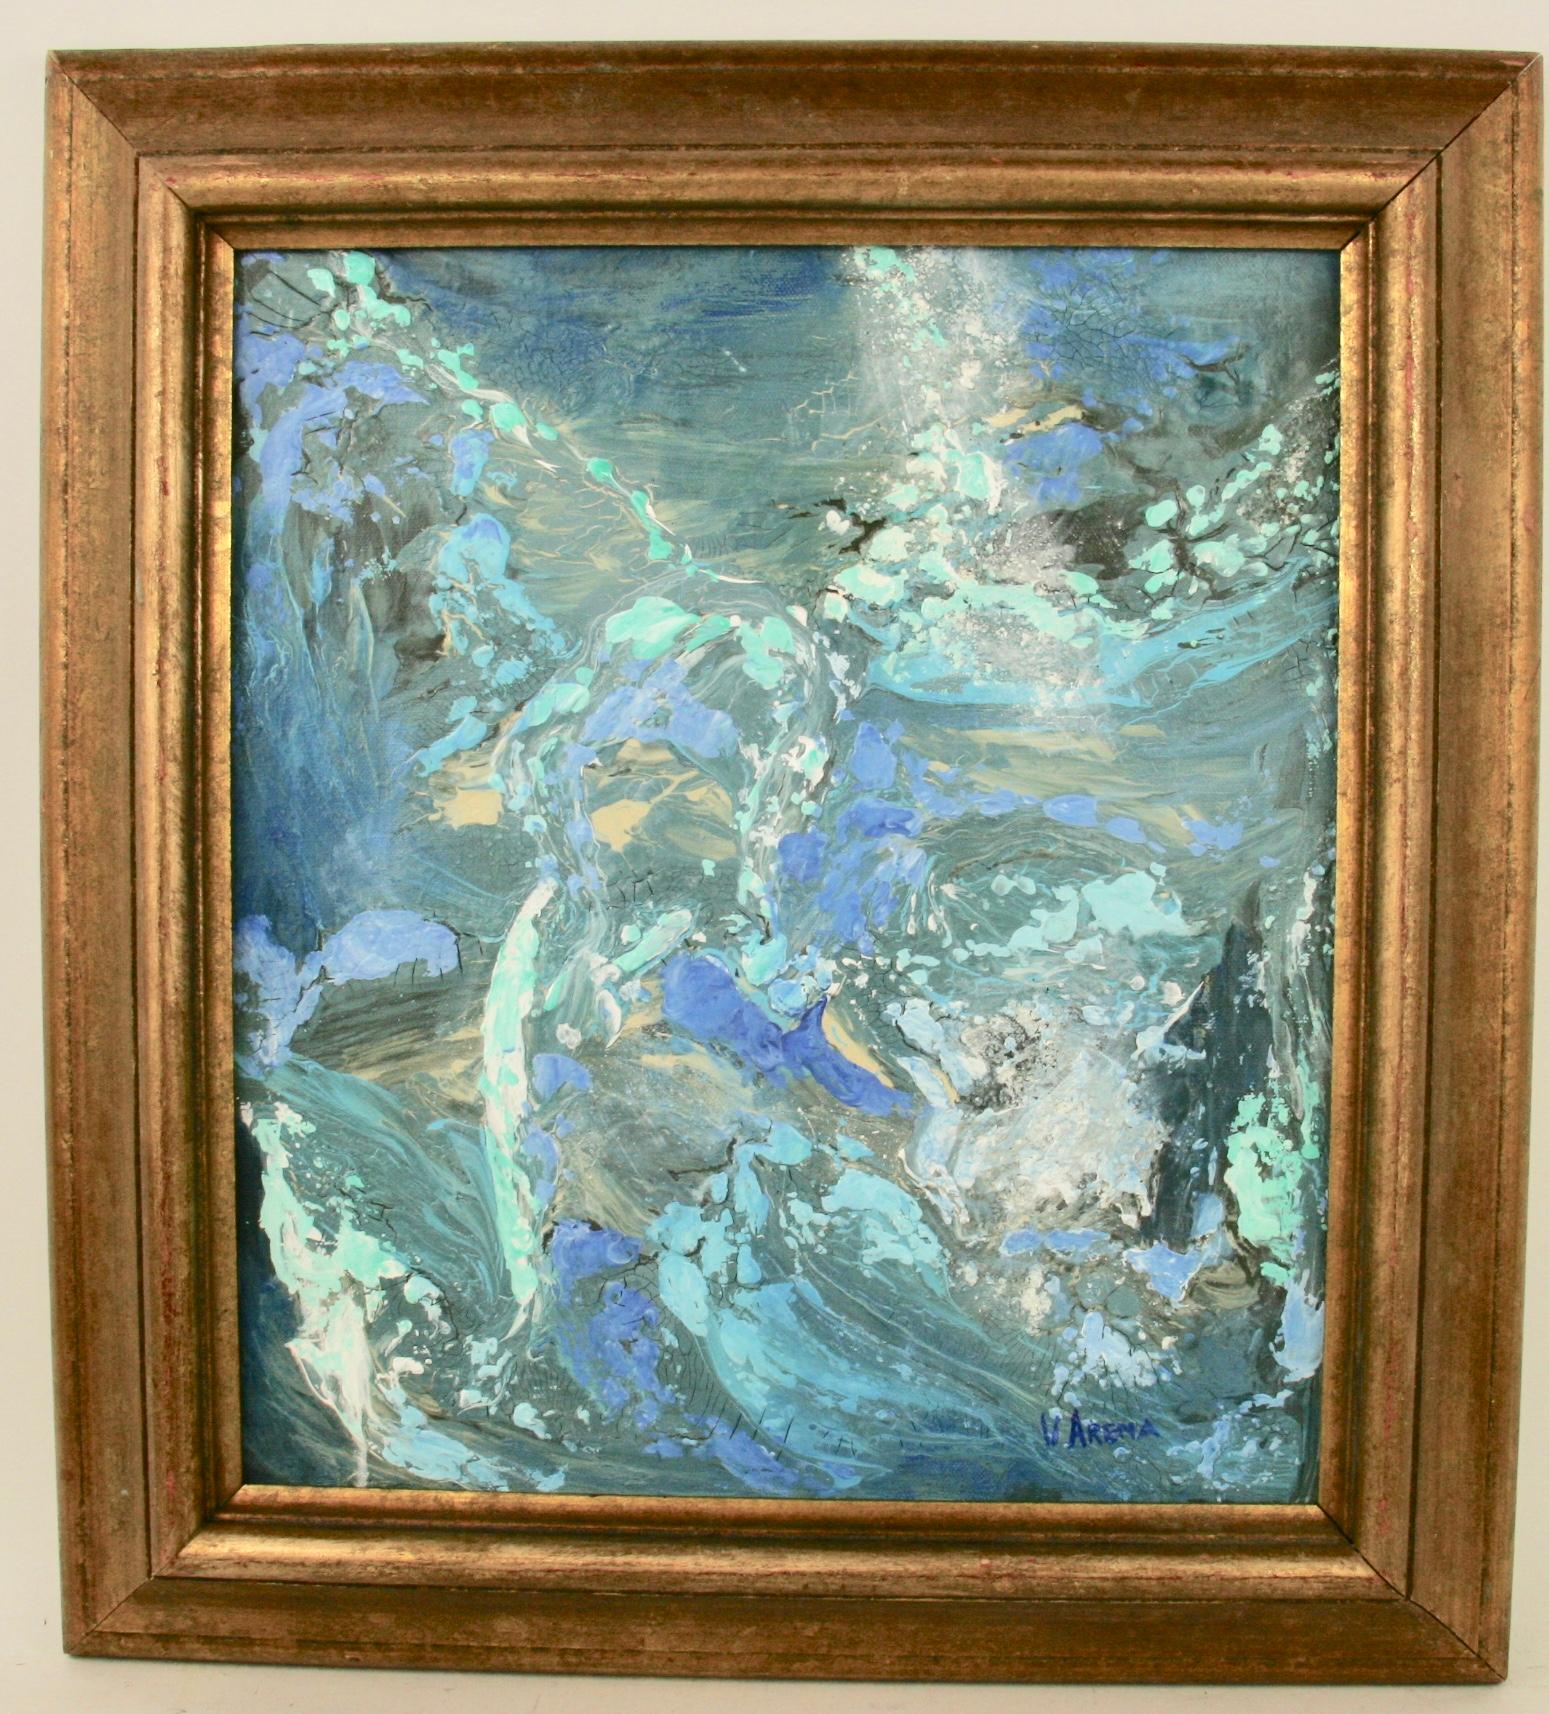 Blue abstract painting ,acrylic impasto on canvas applied to board,displayed in a gilt wood frame,signed by A.Arena1870